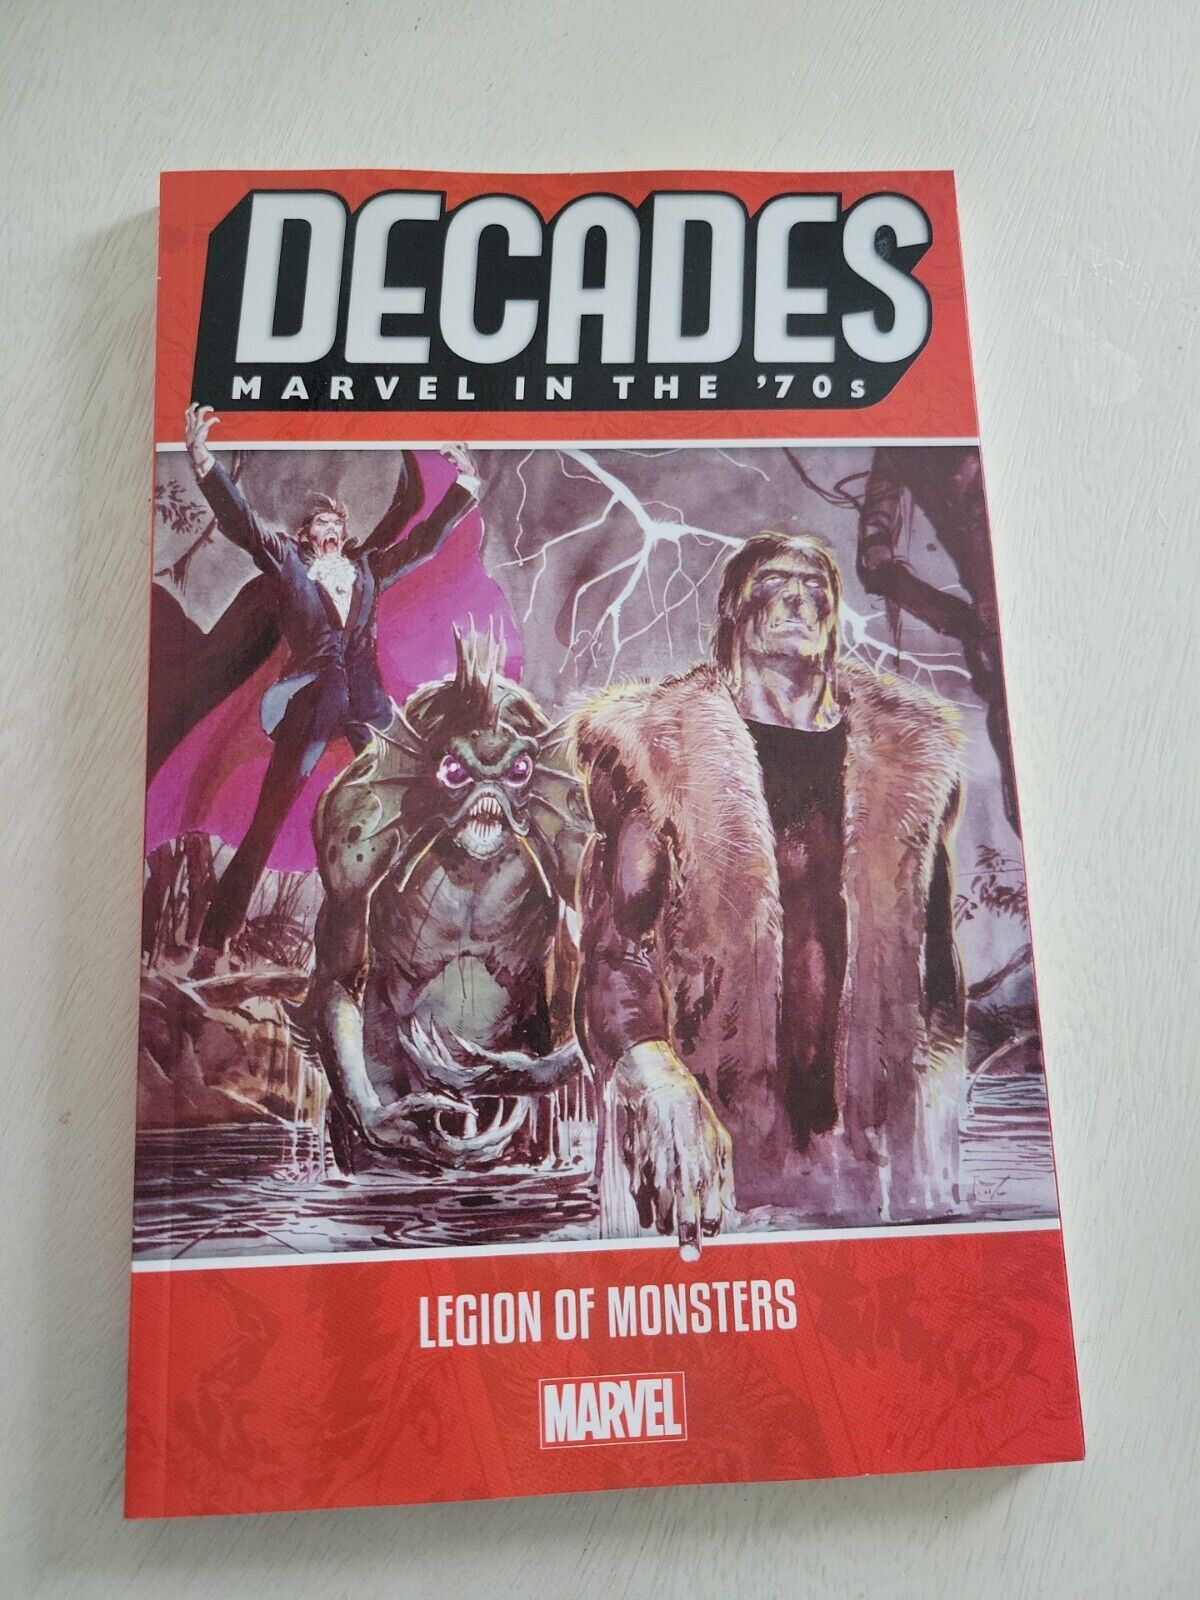 Decades: Marvel in the '70s - Legion of Monsters (Marvel, 2019)